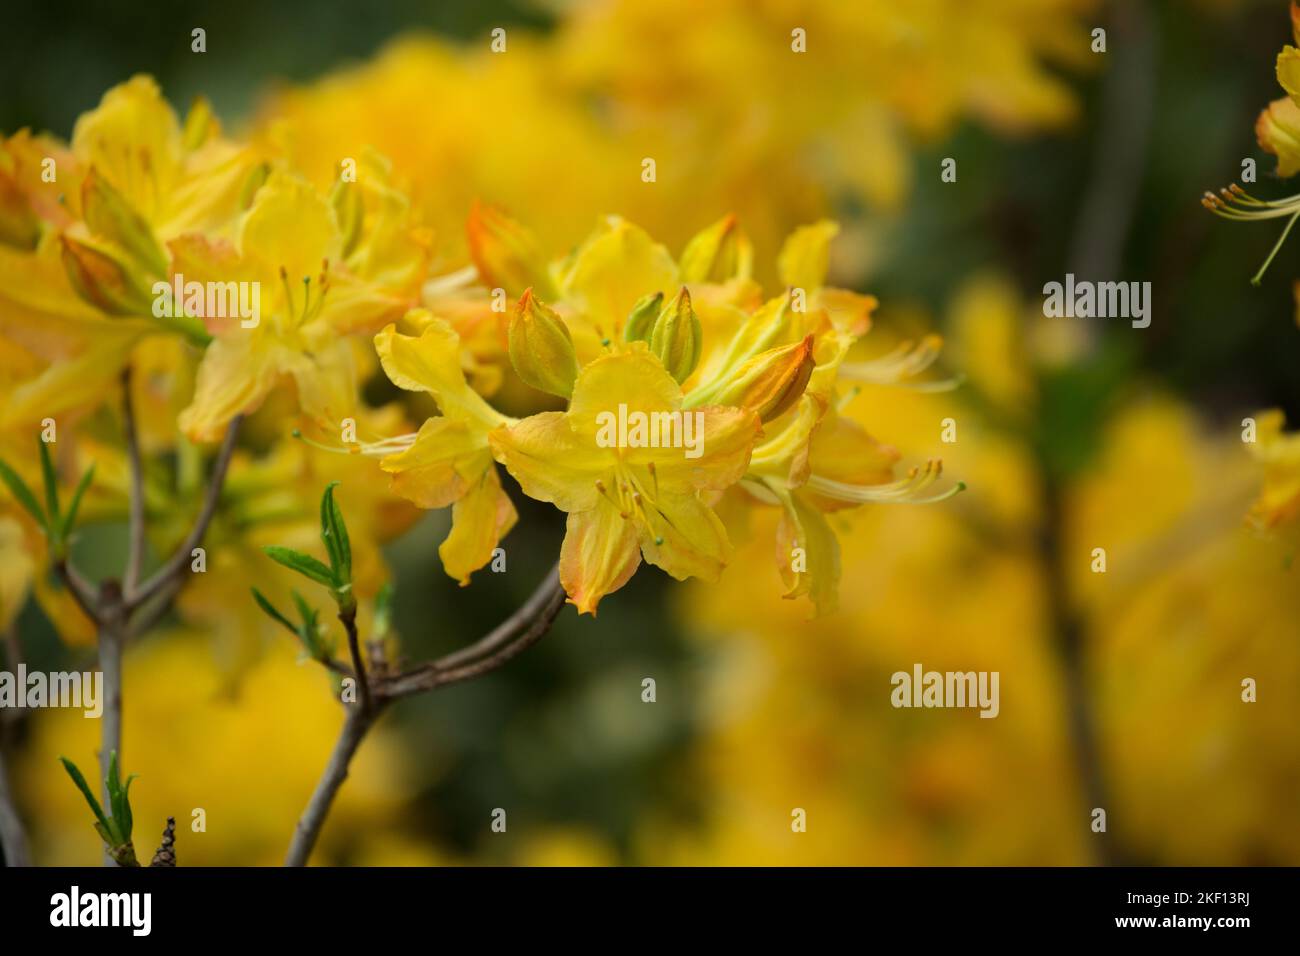 Beautiful warm yellow Rhododendron blossoms, many small flowers. Stock Photo